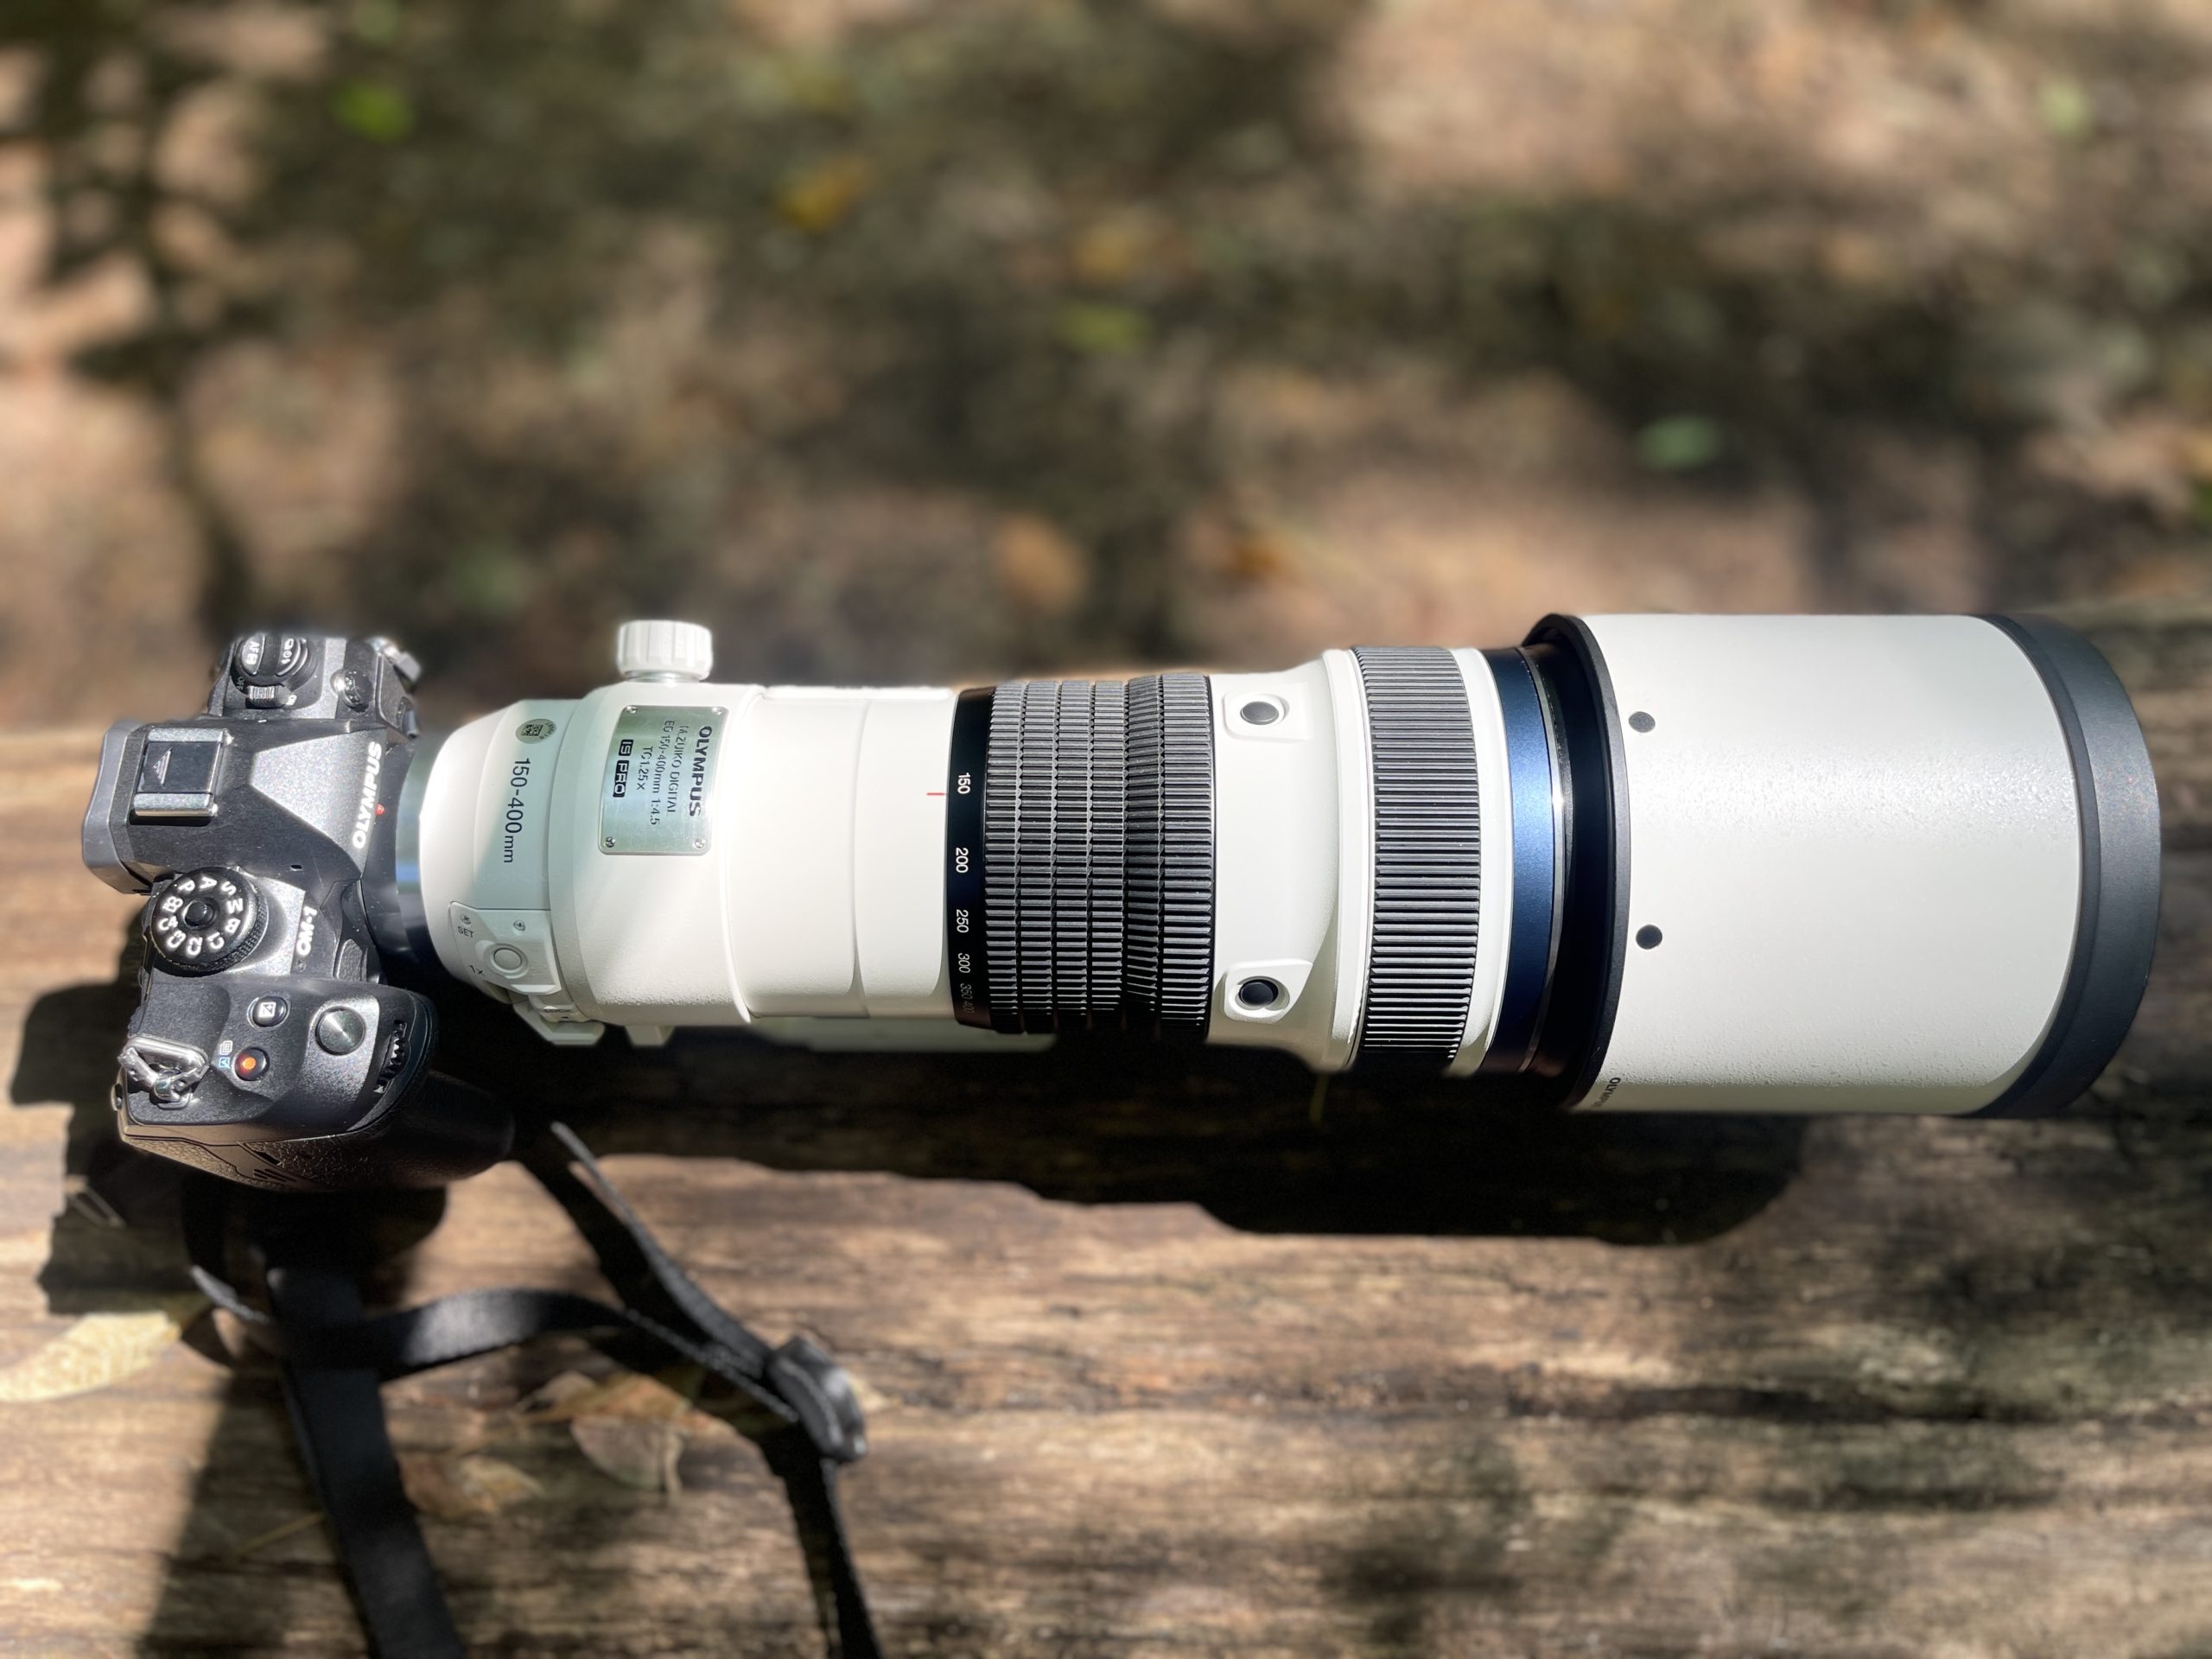 Chris Gampat The Phoblographer Olympus 150-400mm 4.5 PRO 1.4x TC review product photos6